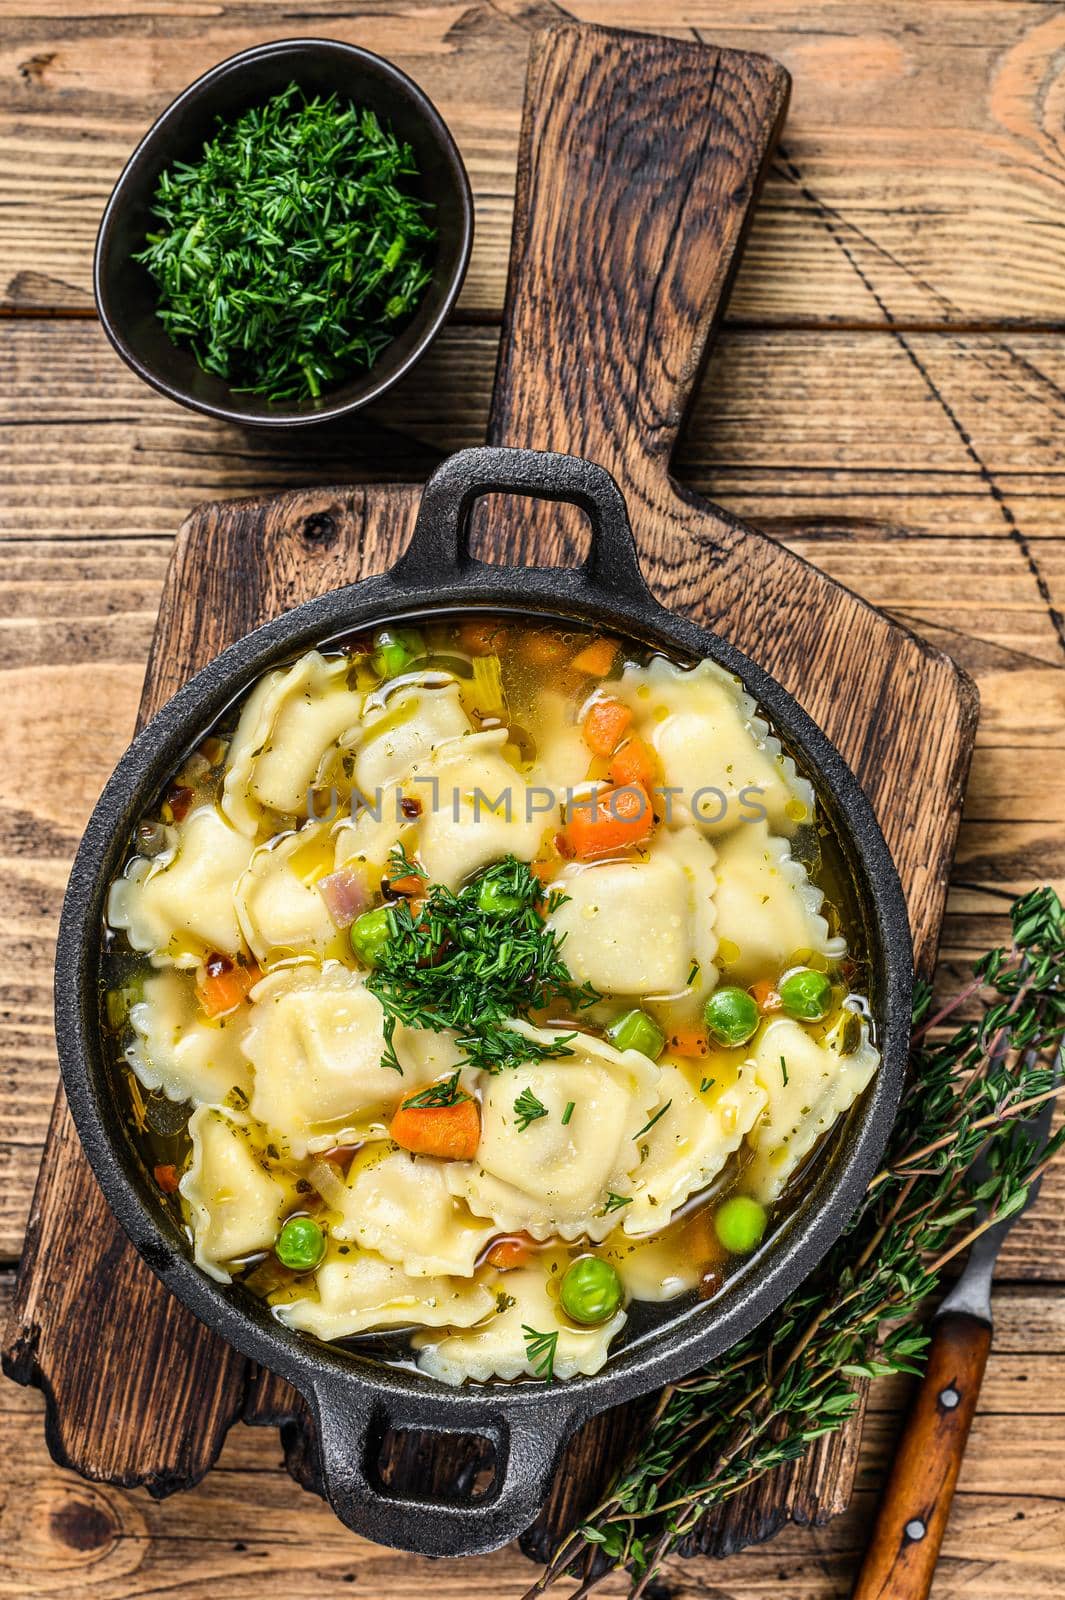 Broth soup with ravioli dumplings pasta in a pan. Wooden background. Top view by Composter